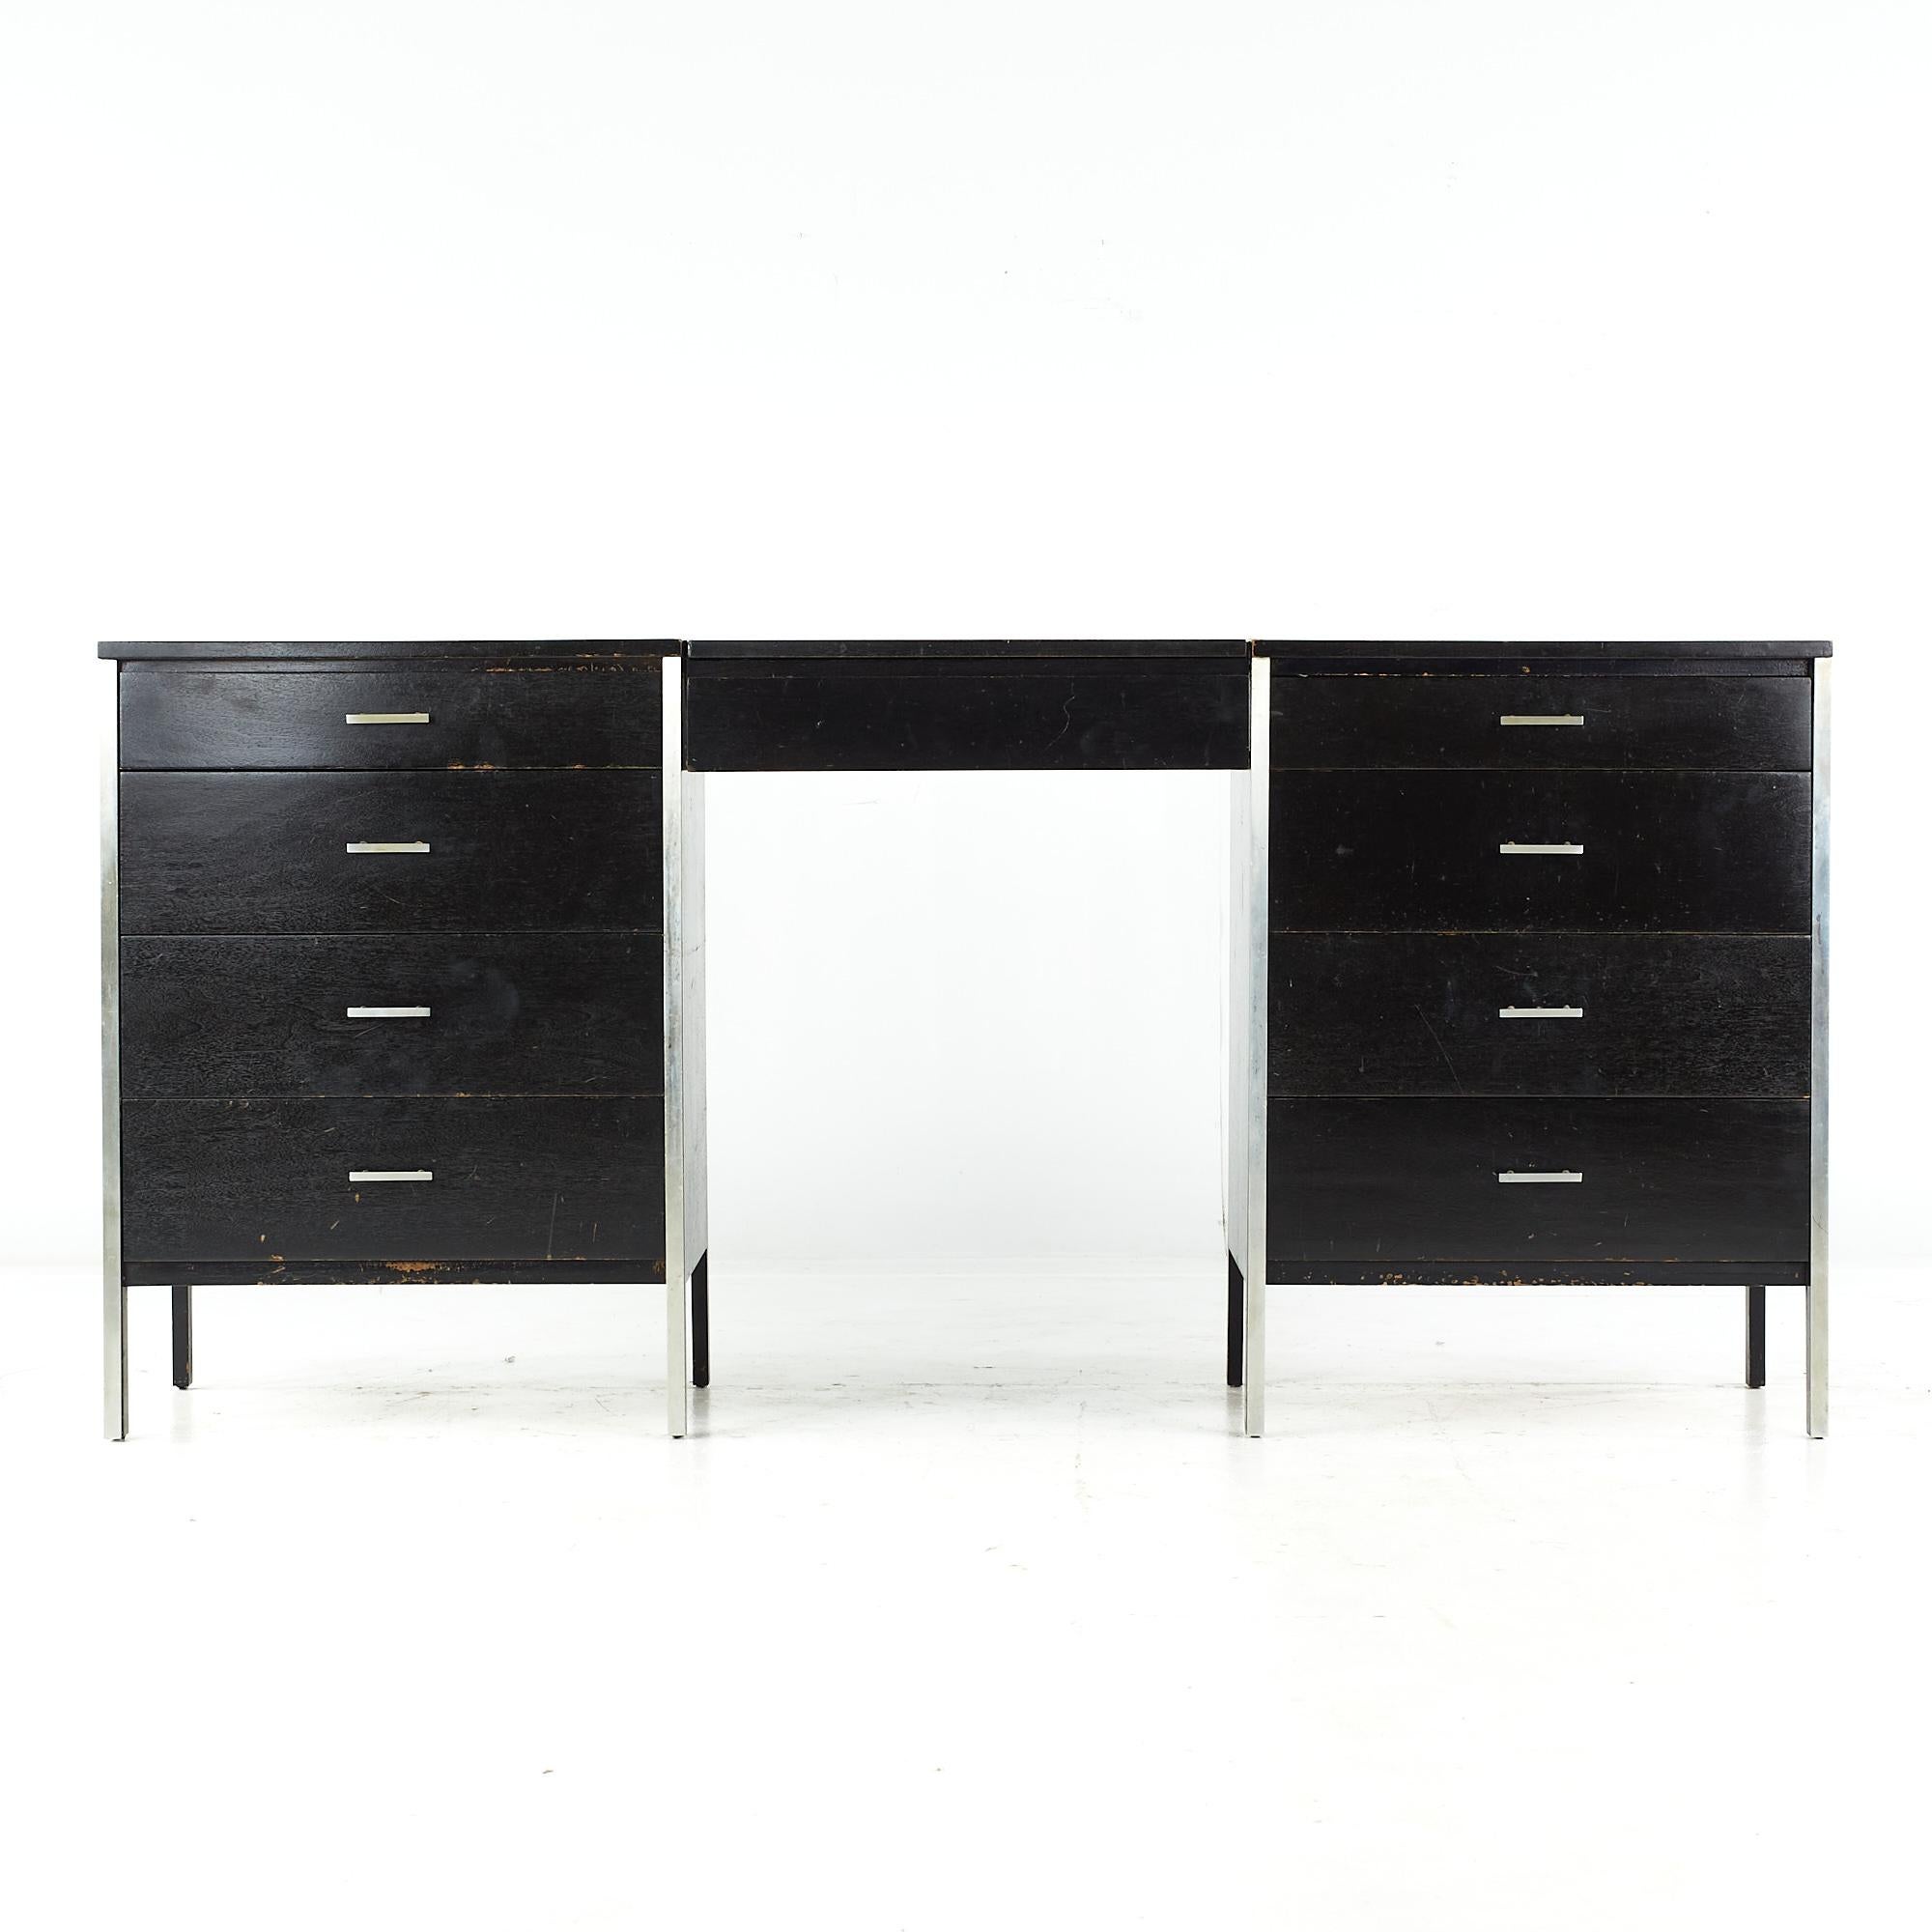 Paul McCobb for Calvin Linear midcentury vanity cabinet

This vanity cabinet measures: 75 wide x 18 deep x 40 inches high

All pieces of furniture can be had in what we call restored vintage condition. That means the piece is restored upon